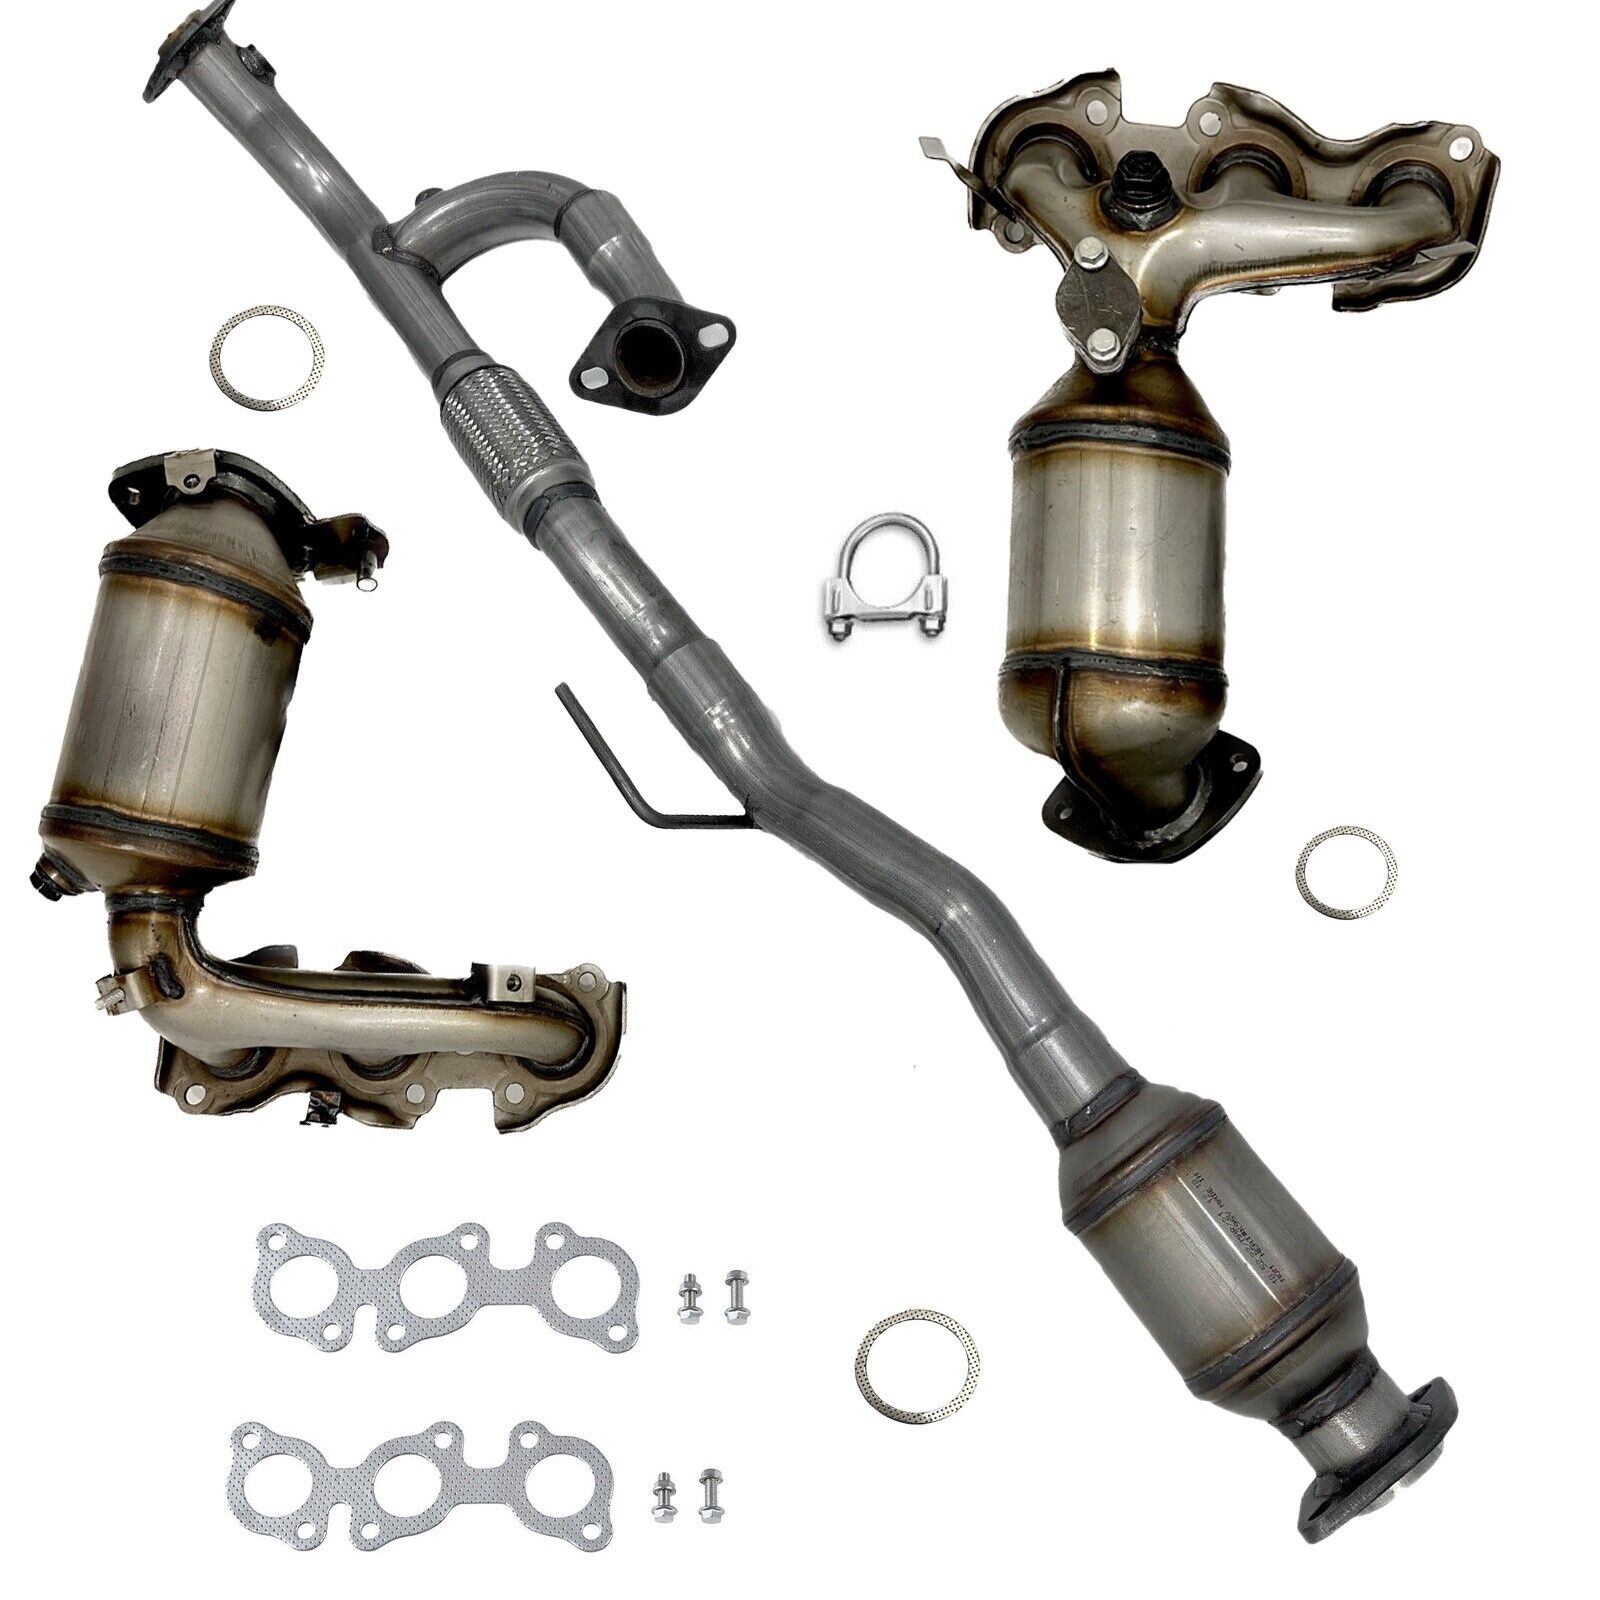 All 3 Catalytic converter for 2002-2003 Lexus ES300 3.0L with Flex Y pipe